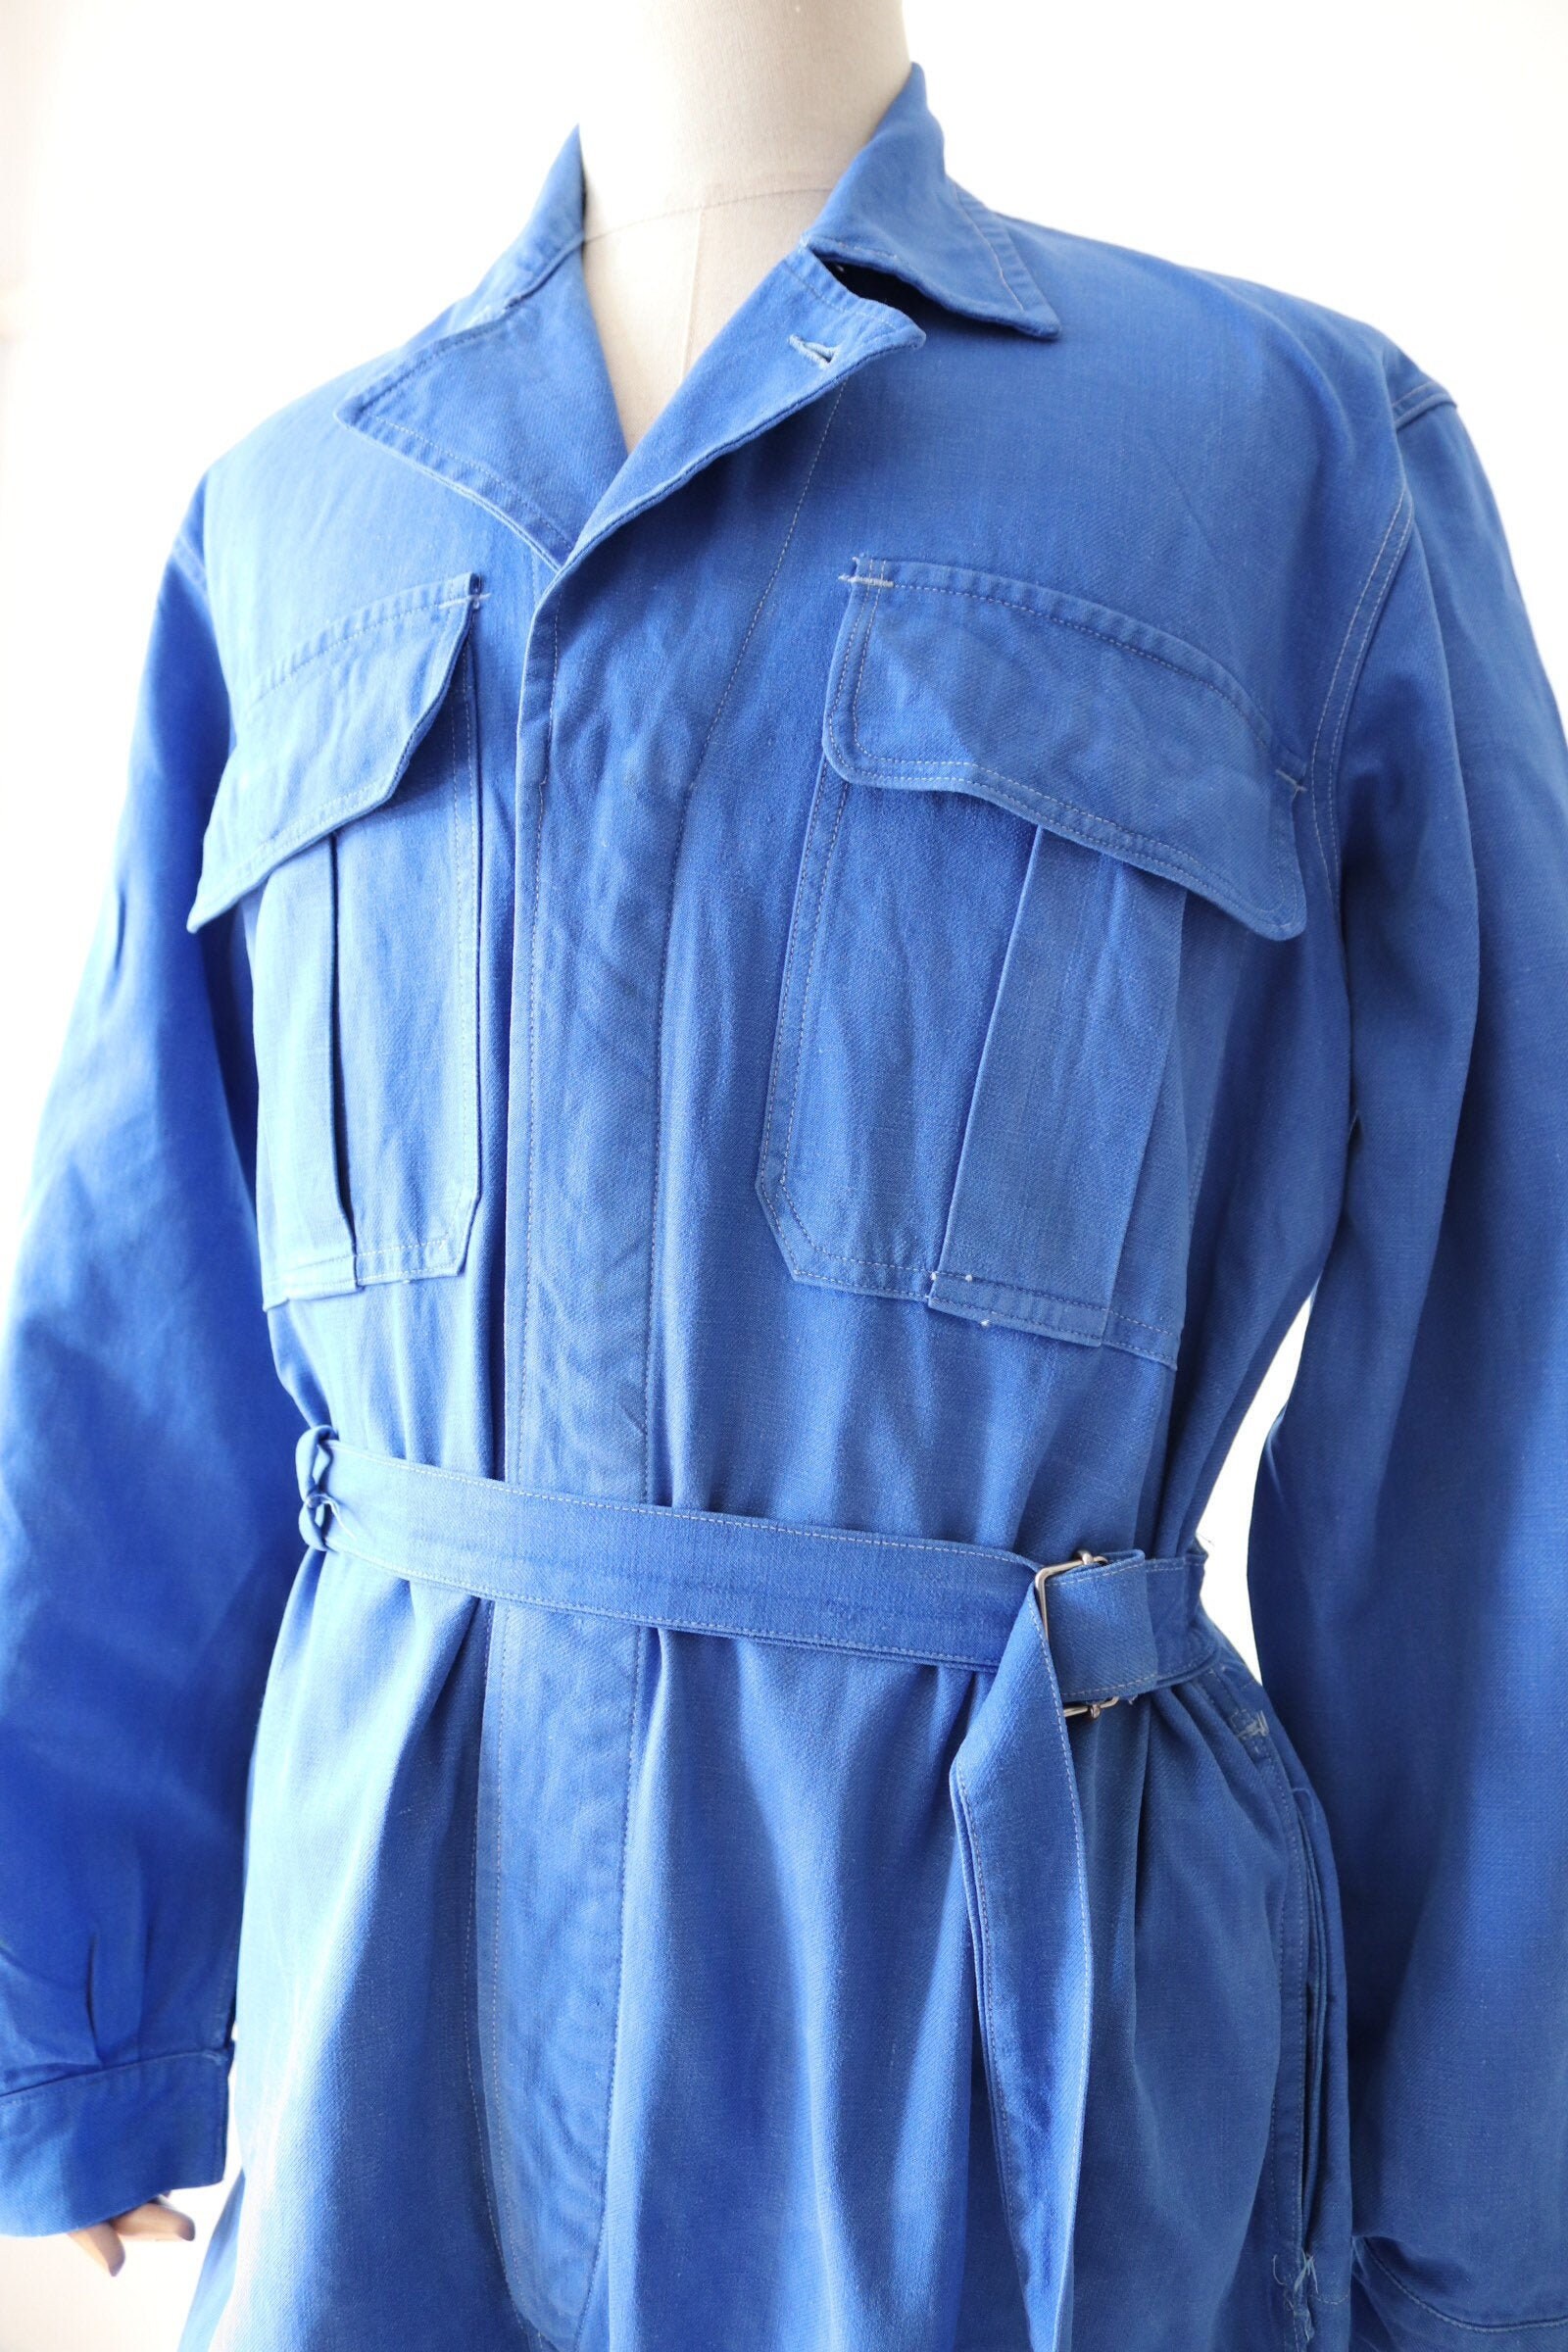 Vintage 1960s 60s french blue cotton twill belted overalls coveralls ...